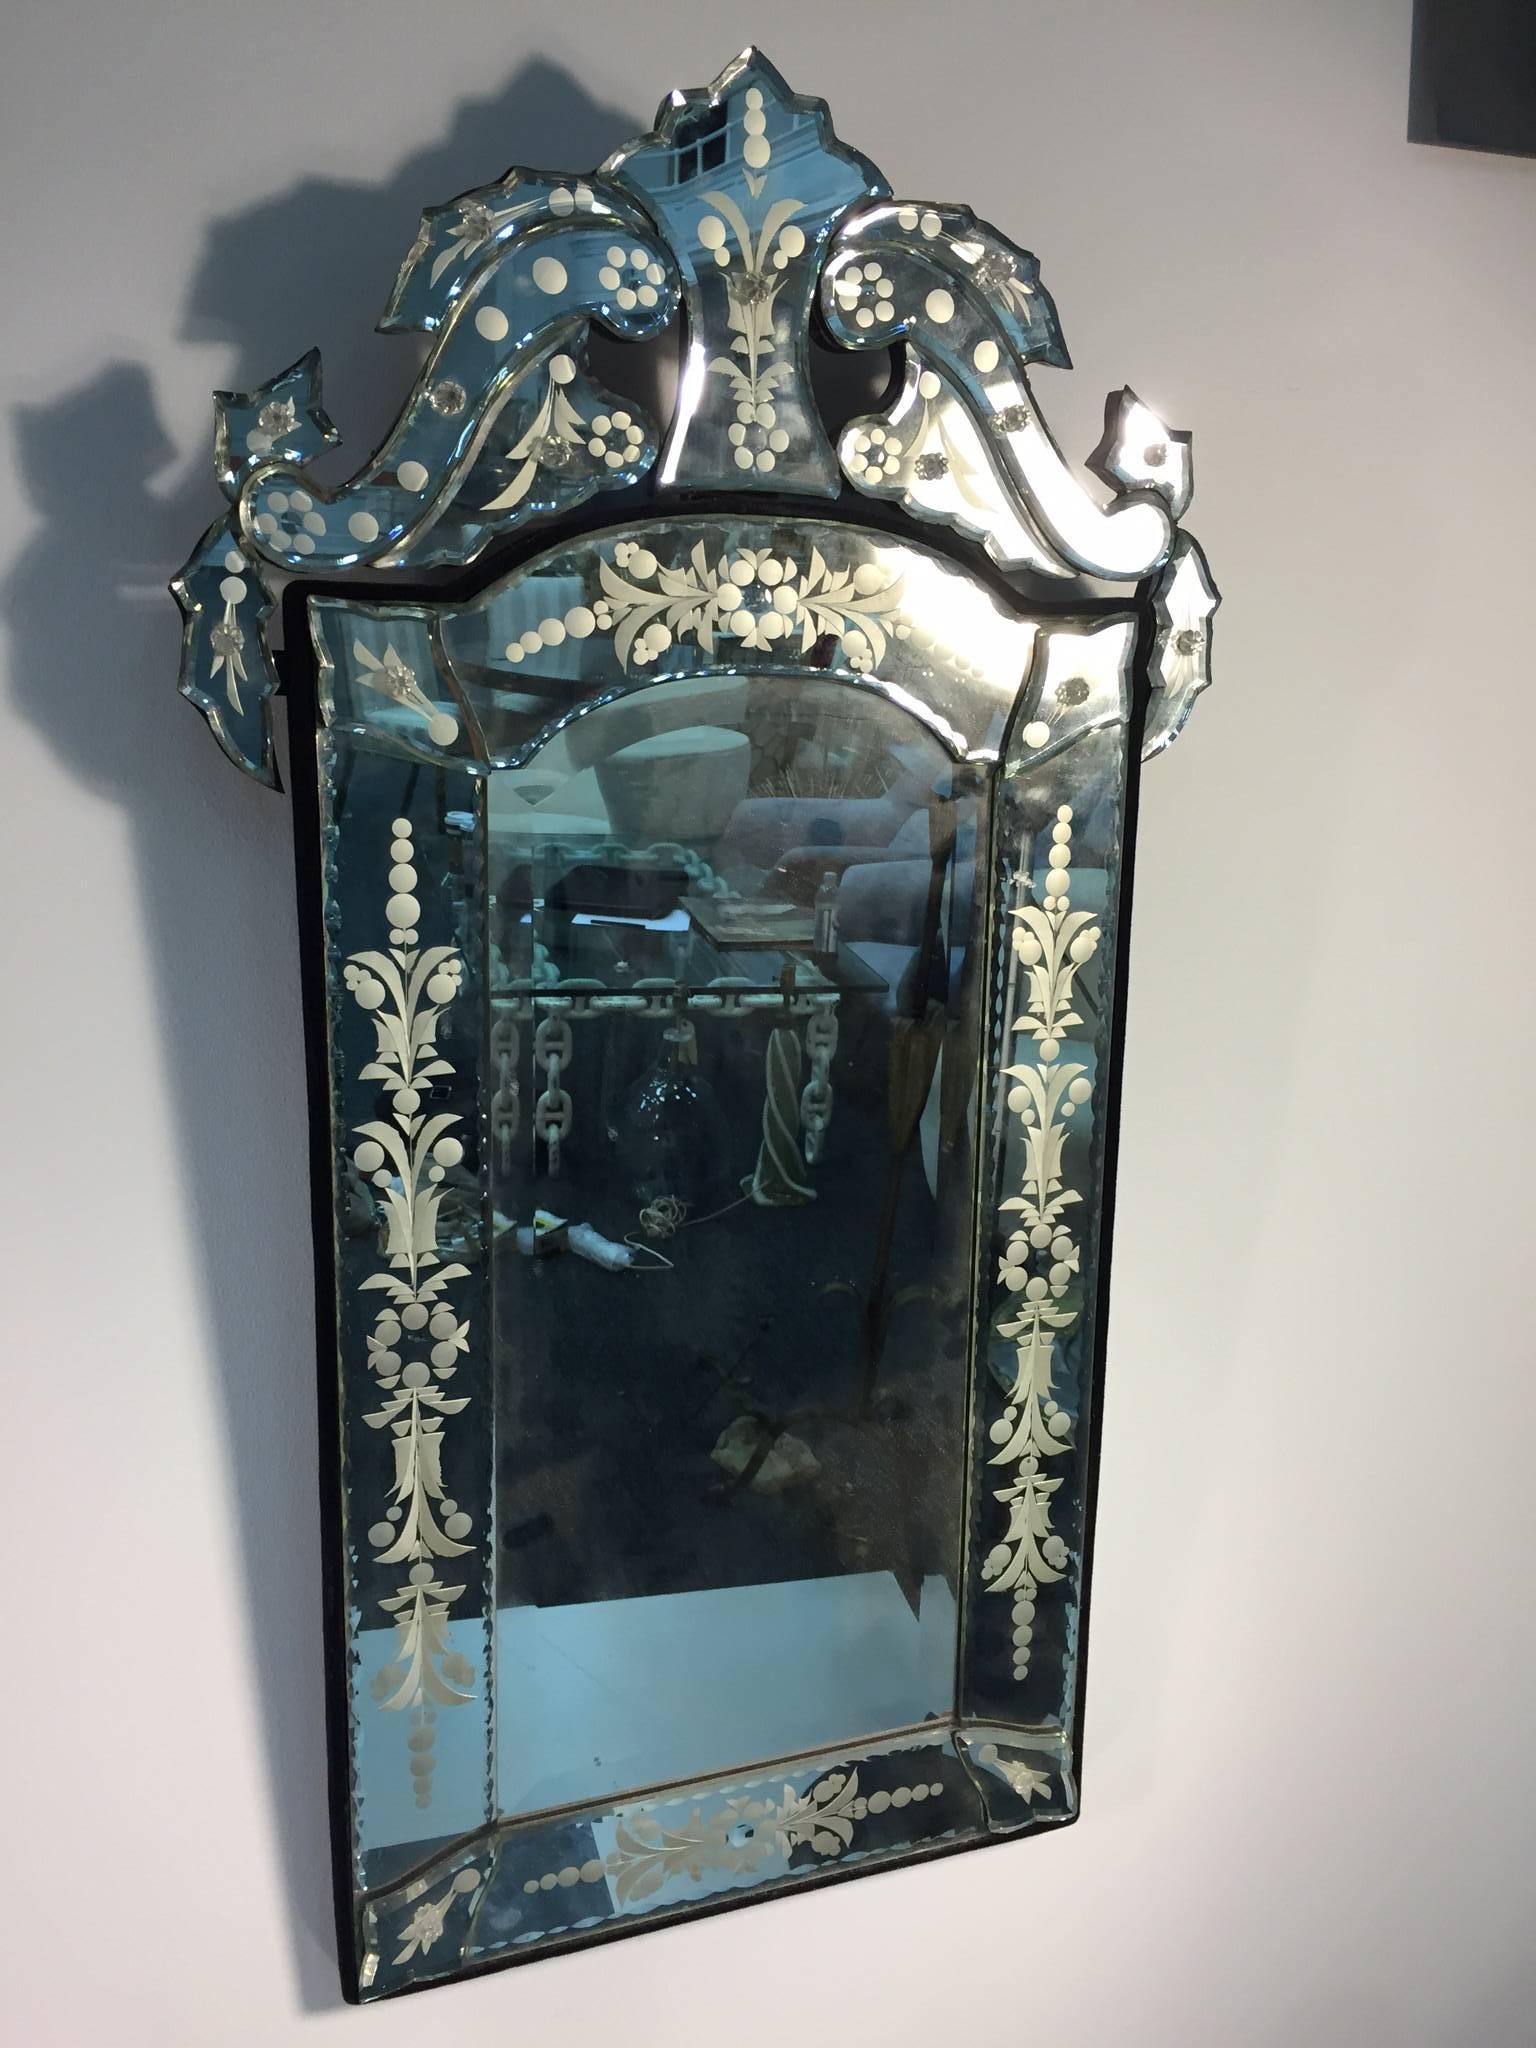 A beautiful cut-glass and etched Venetian mirror with floral and leaf motif.